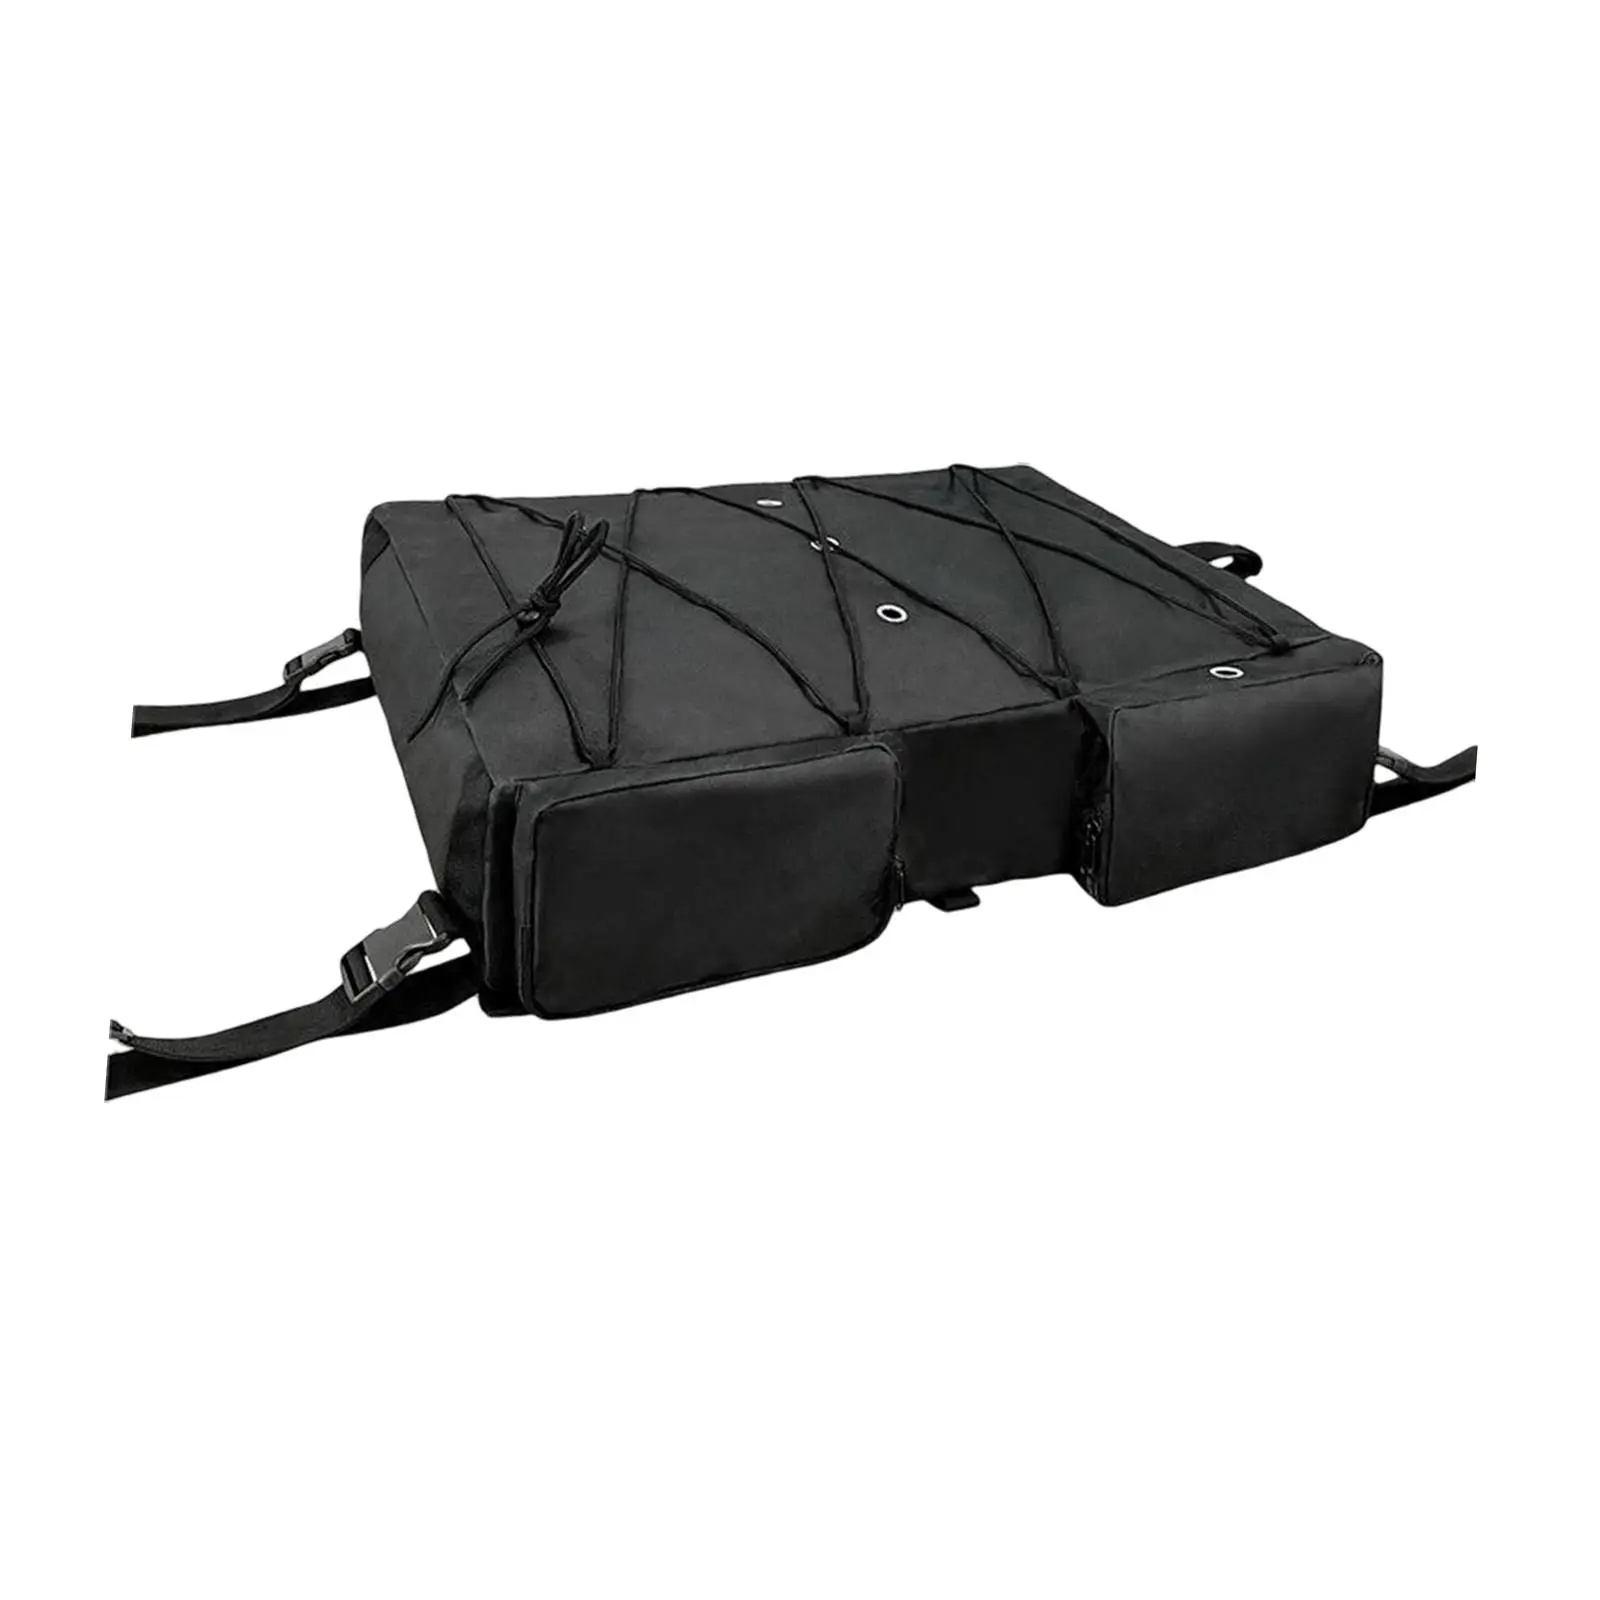 T Bag T Top and Bimini Top Storage Pack Life Jacket Storage Bag for Outdoor